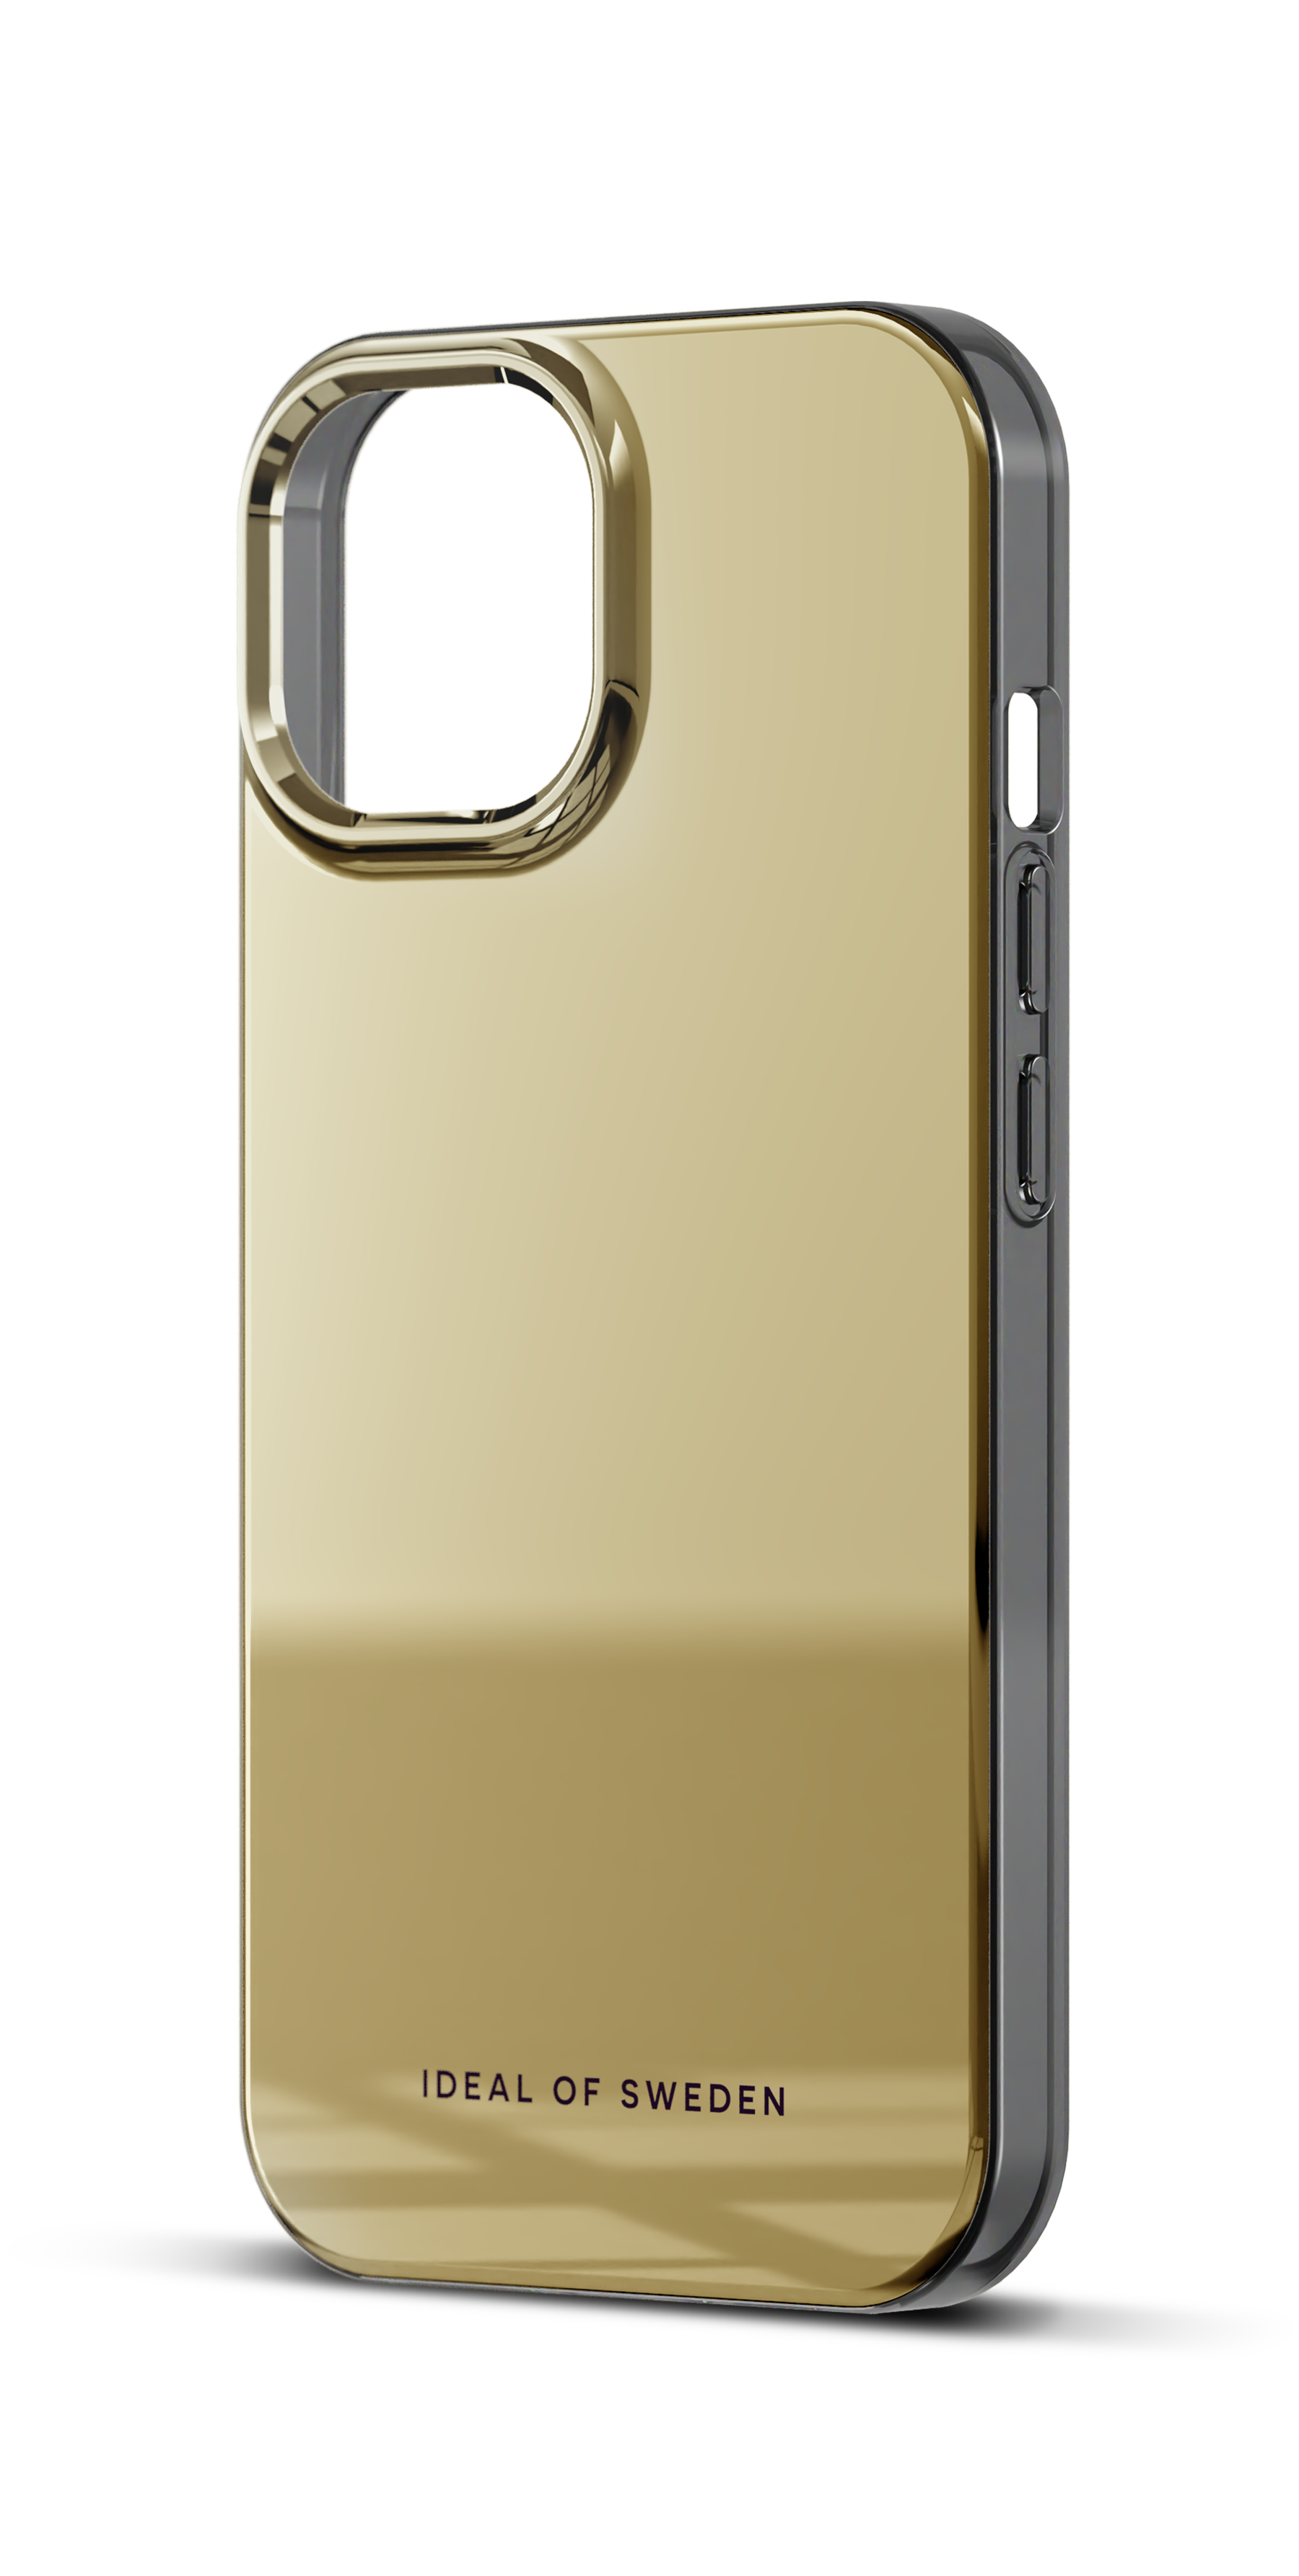 Clear Cover iPhone 15 Mirror Gold